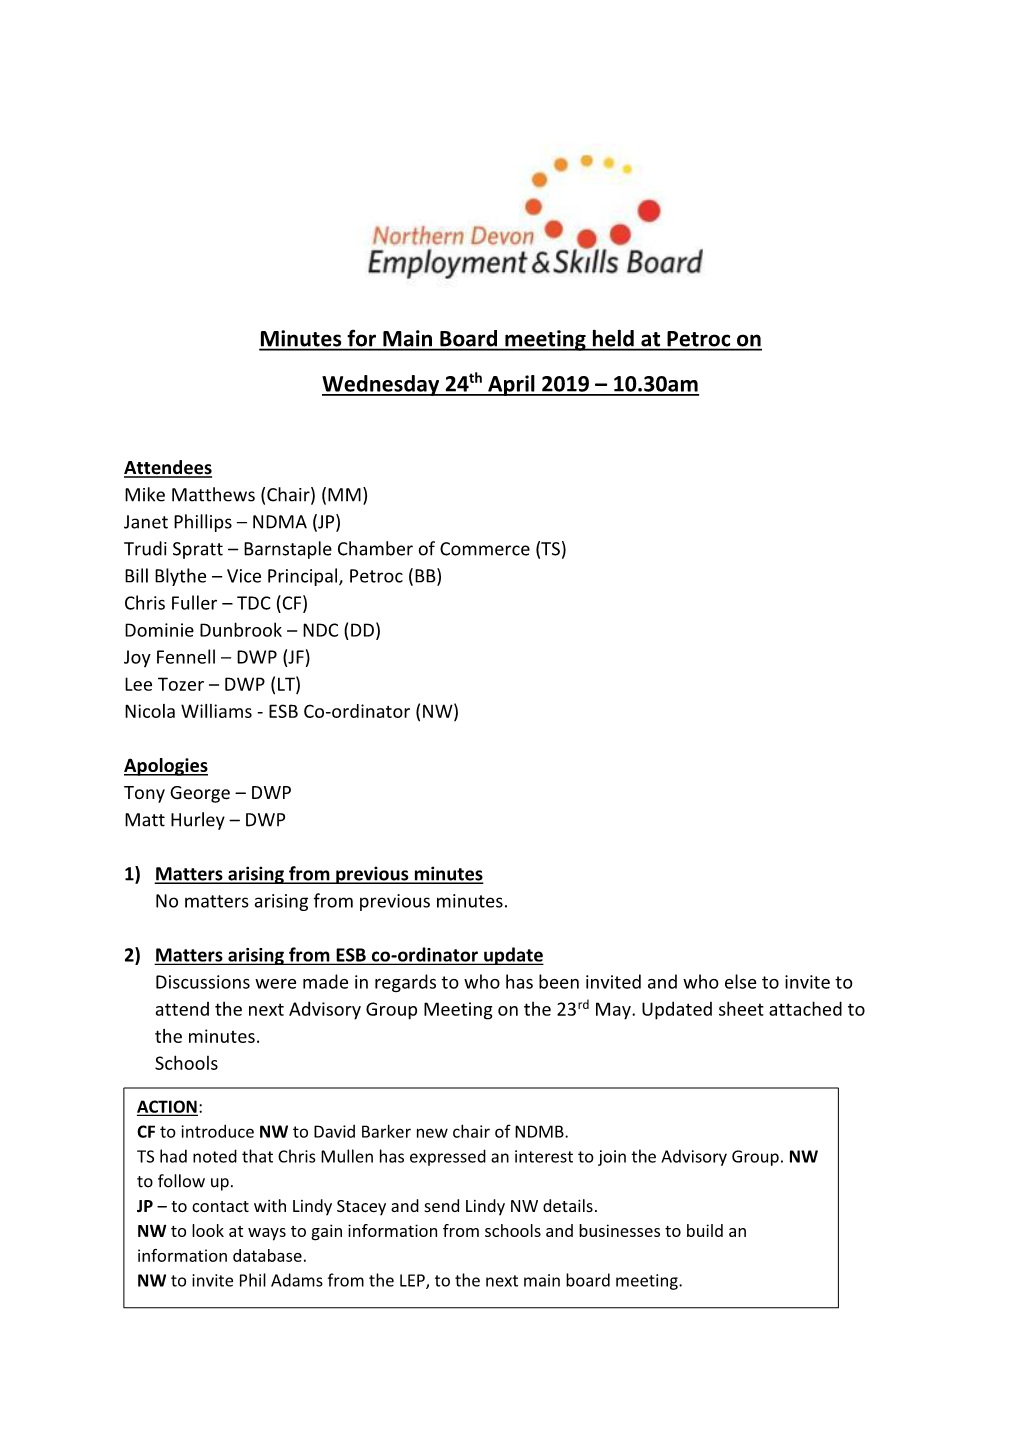 Minutes for Main Board Meeting Held at Petroc on Wednesday 24Th April 2019 – 10.30Am